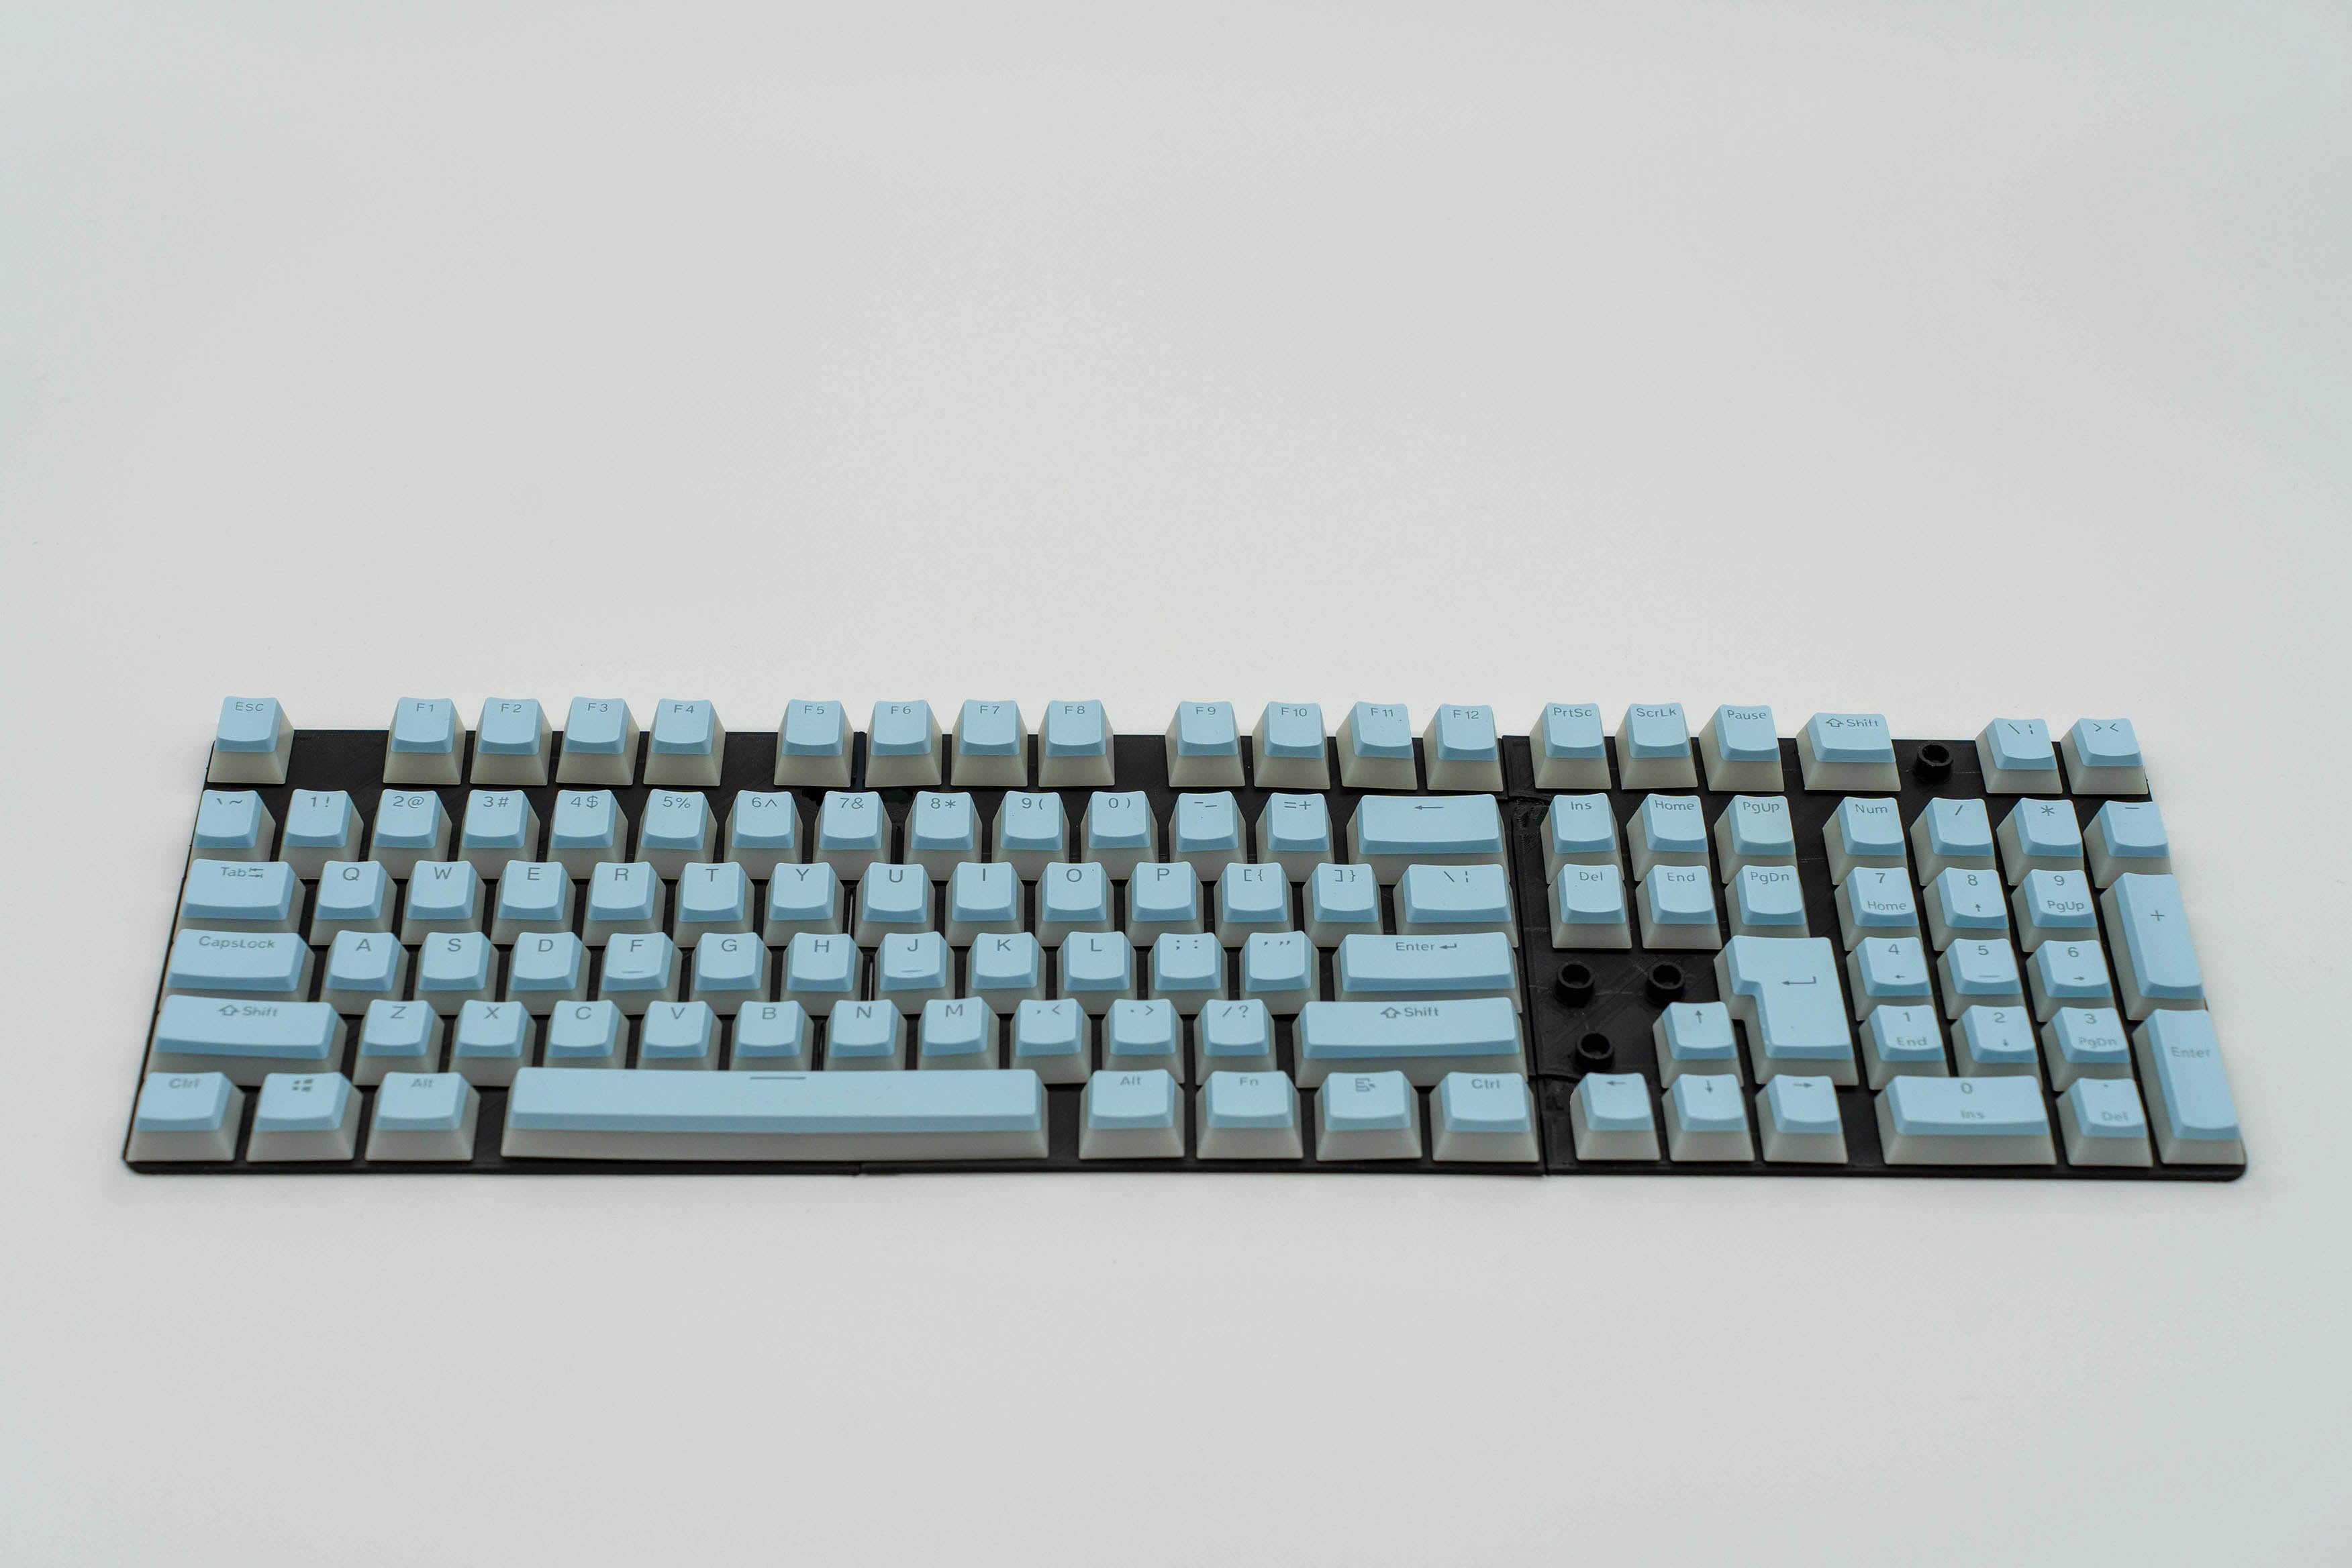 Blue Pudding Keycaps full set front view